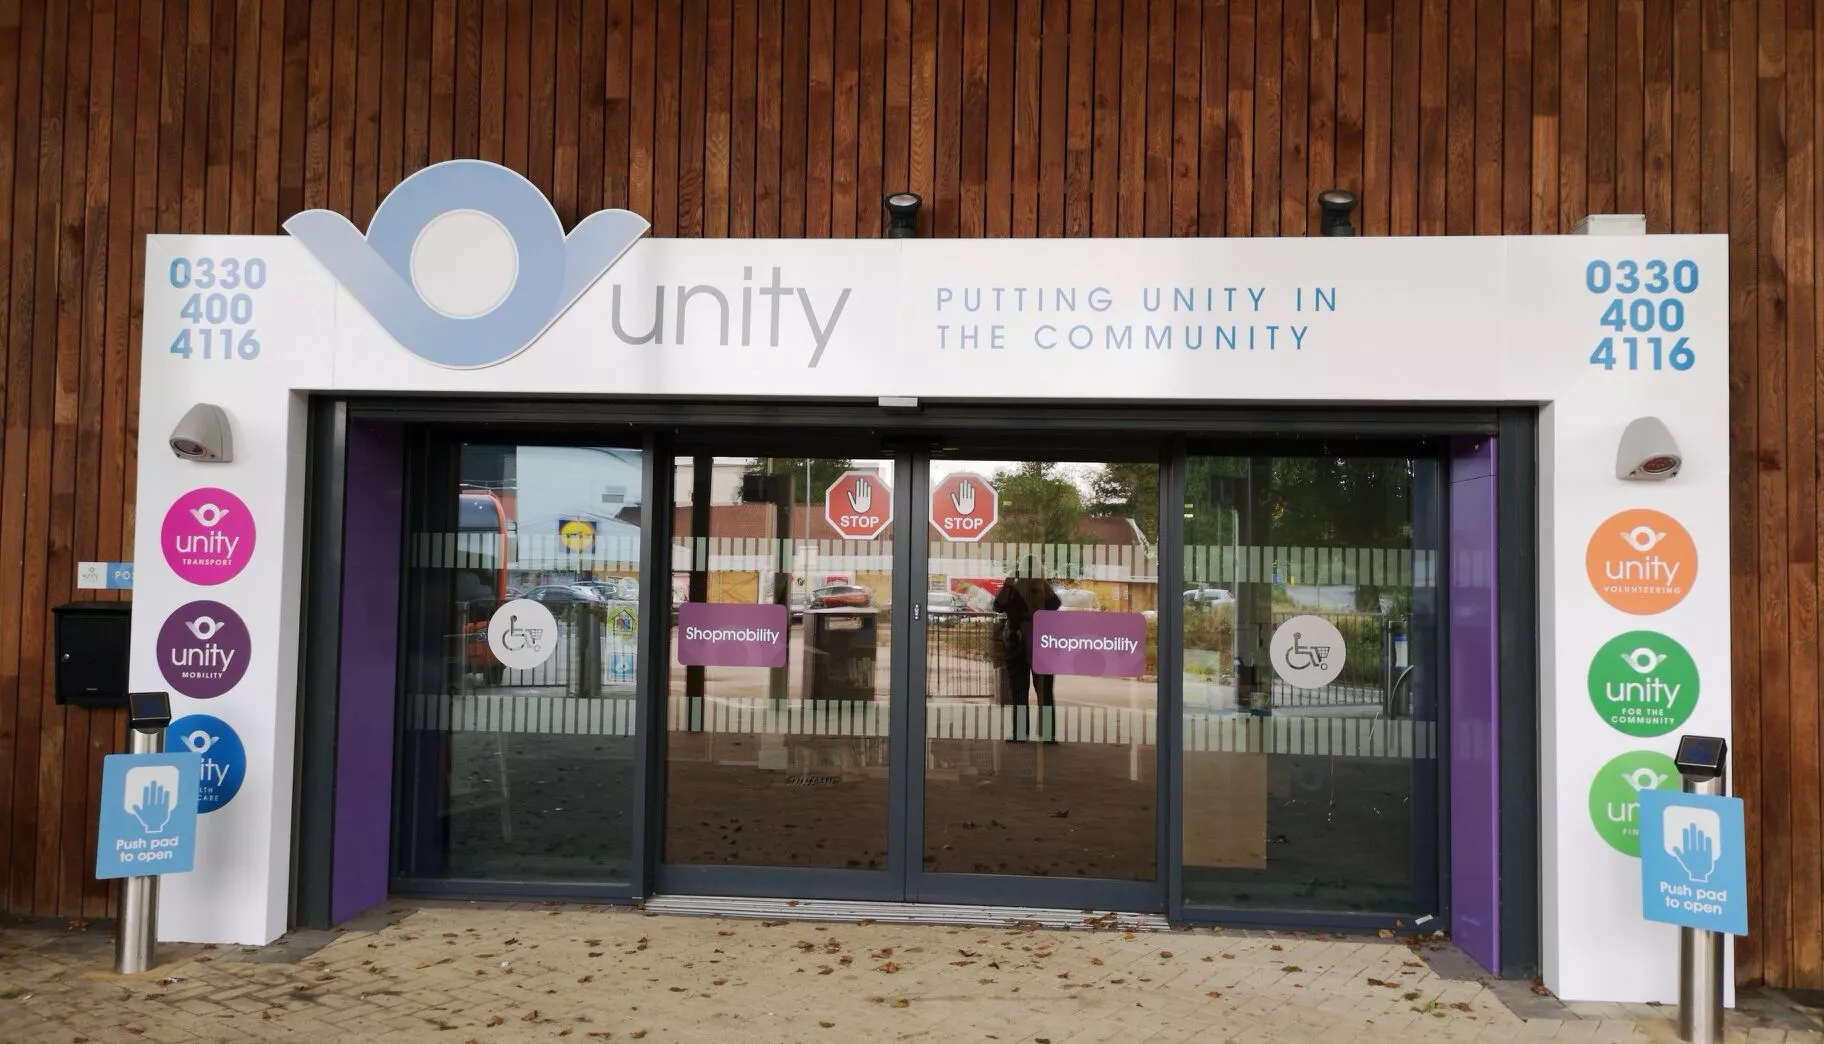 Unity ShopMobility Andover – ShopMobility UK Scheme of the Month (August 2022)